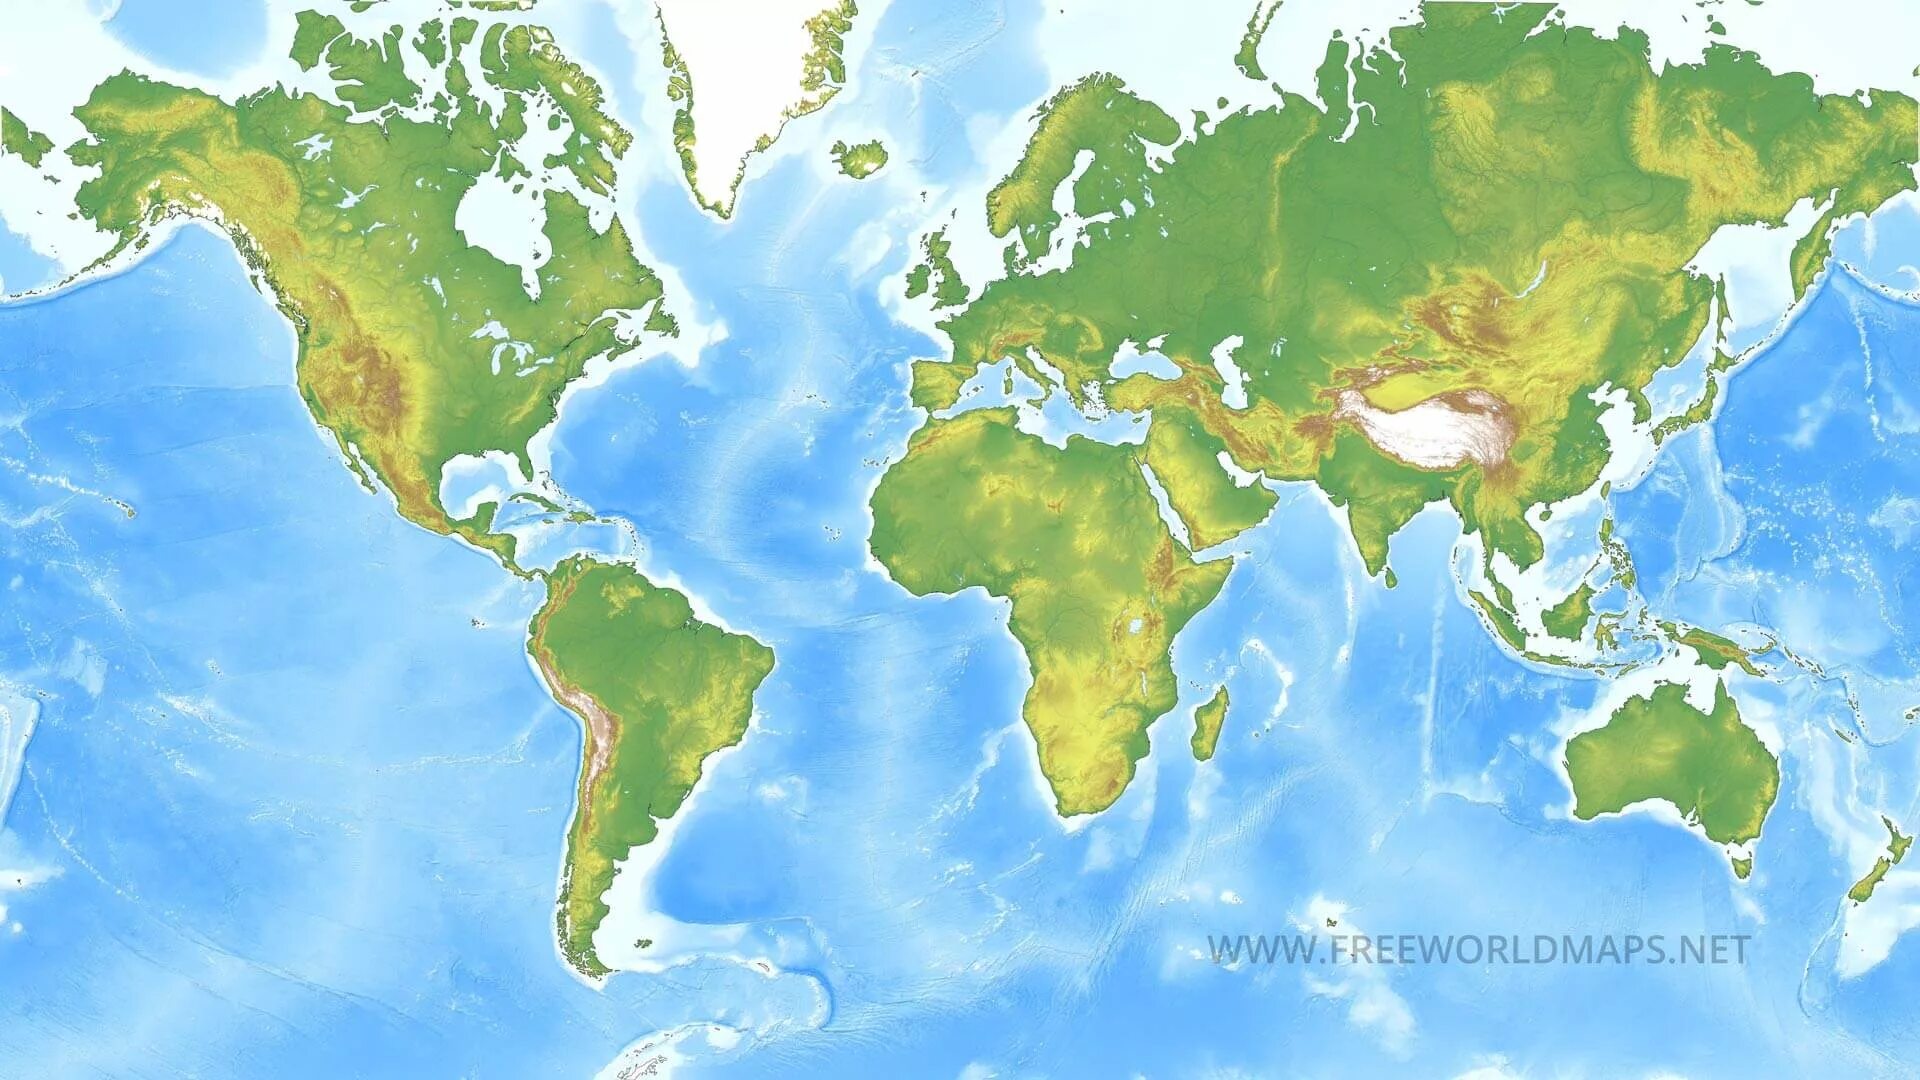 Physical world. World Map физическая. Physical Map of the World. Карта мирового океана. Geographical Map of the World.